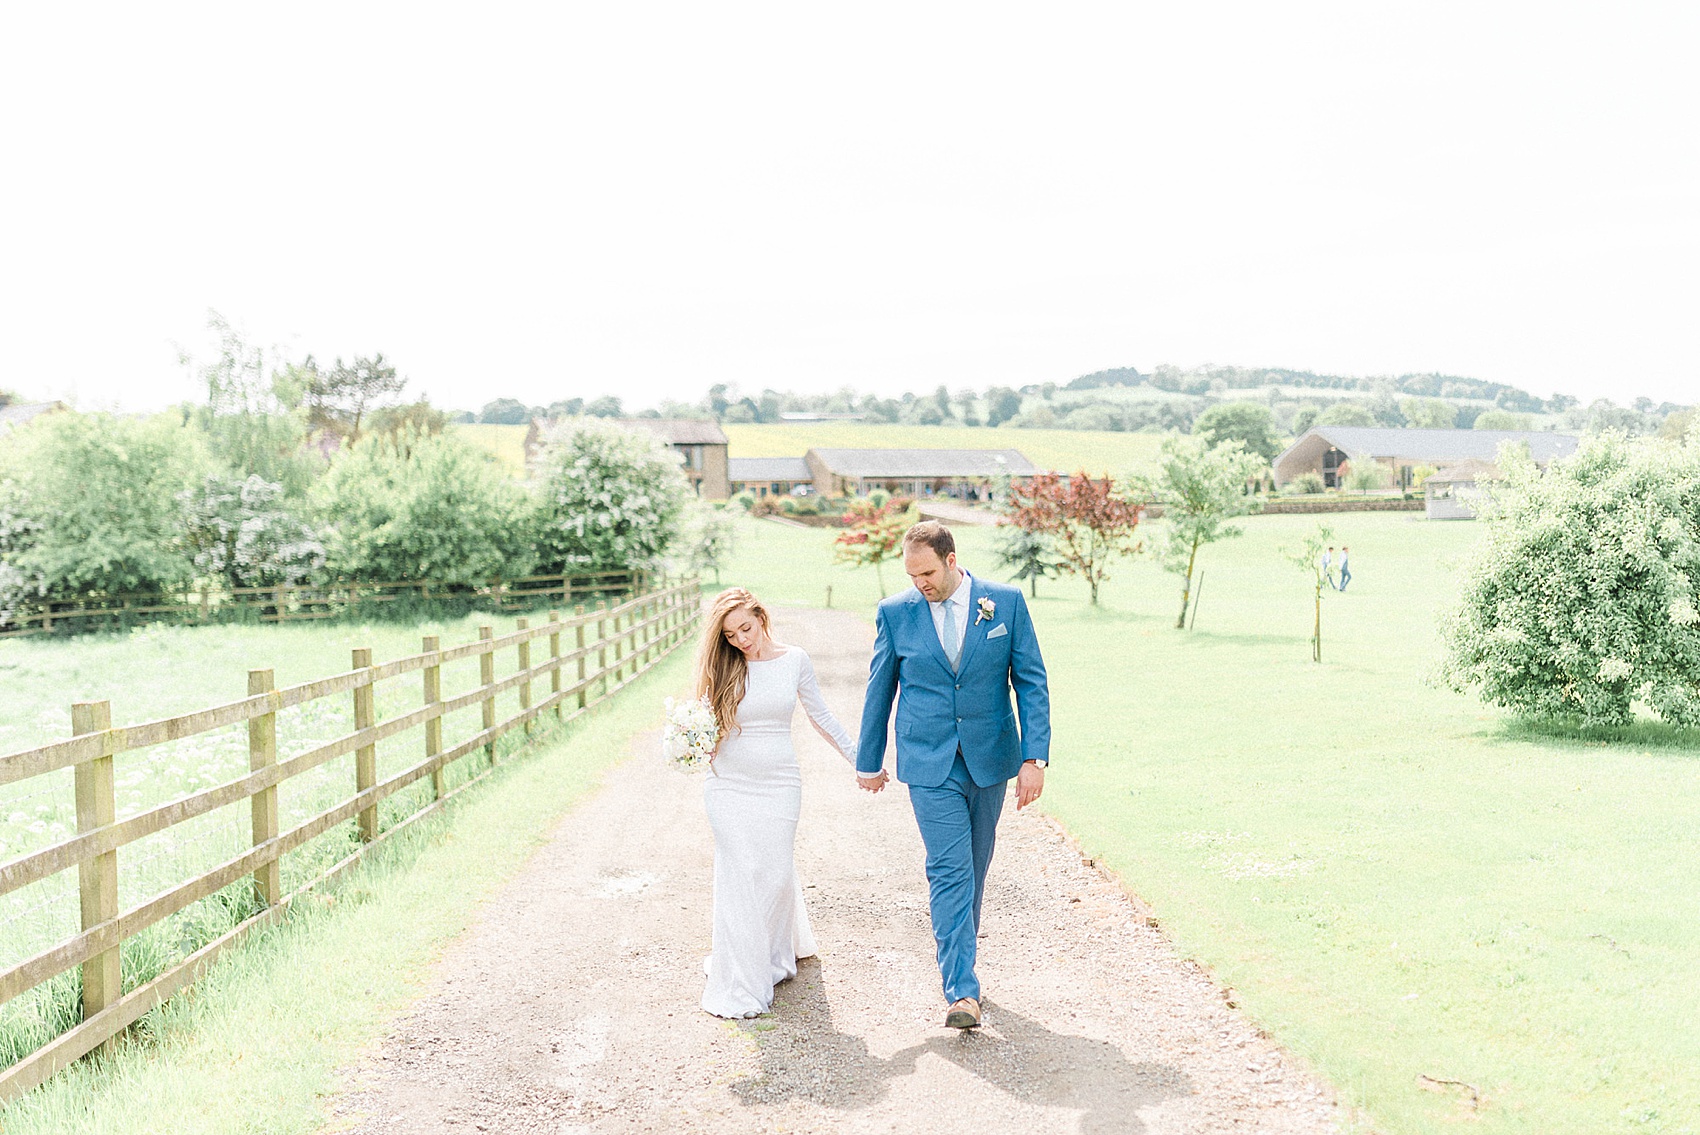  Pronovias modern dress Yorkshire wedding - A Pronovias Dress Embroidered with Forget-me-nots for an Italian Inspired, Flower-Filled Spring Wedding in Yorkshire